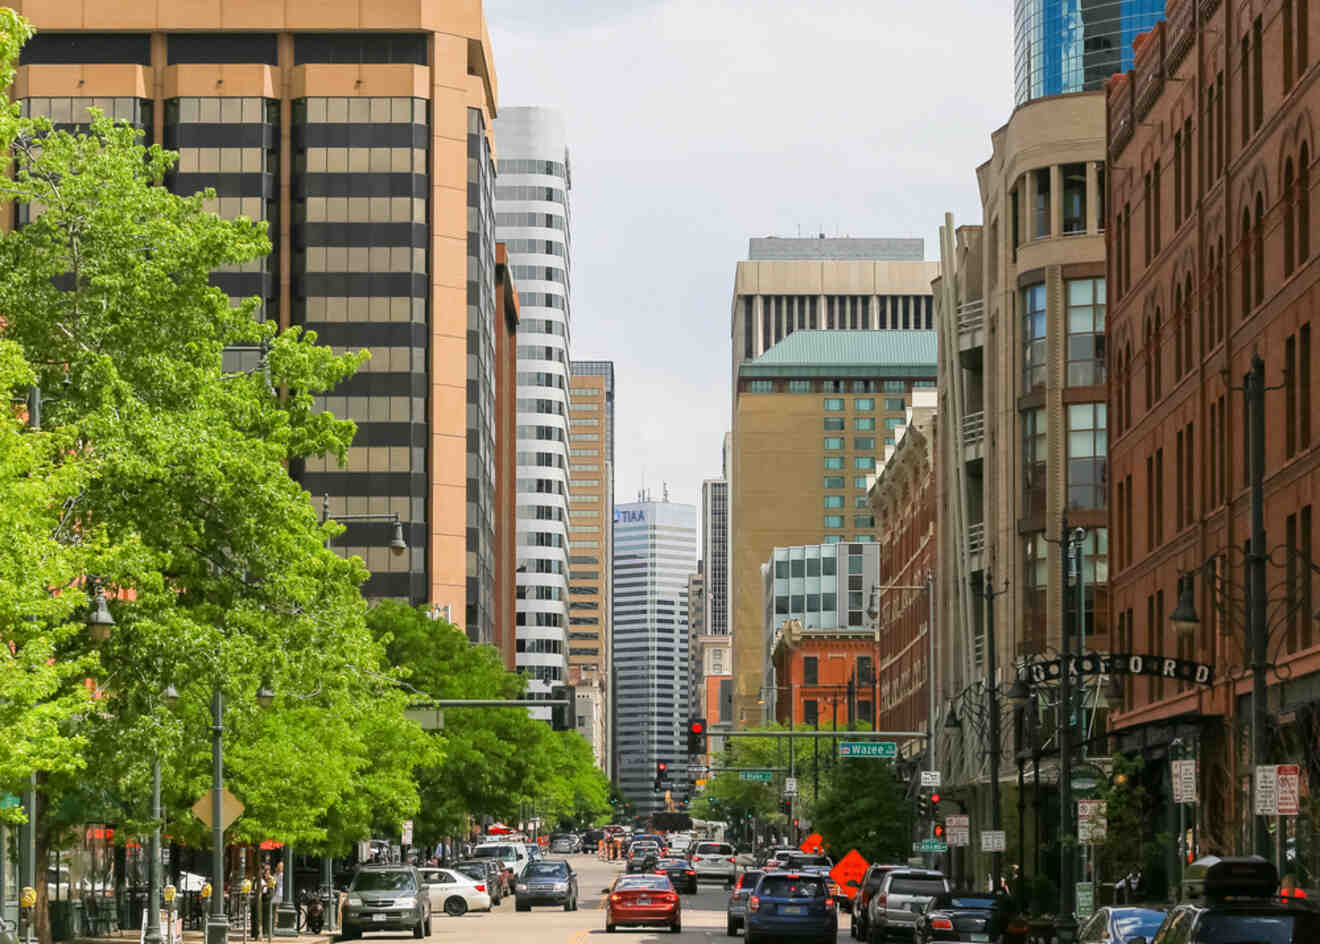 Vibrant street view in Downtown Denver, lined with green trees and a mixture of modern and traditional buildings